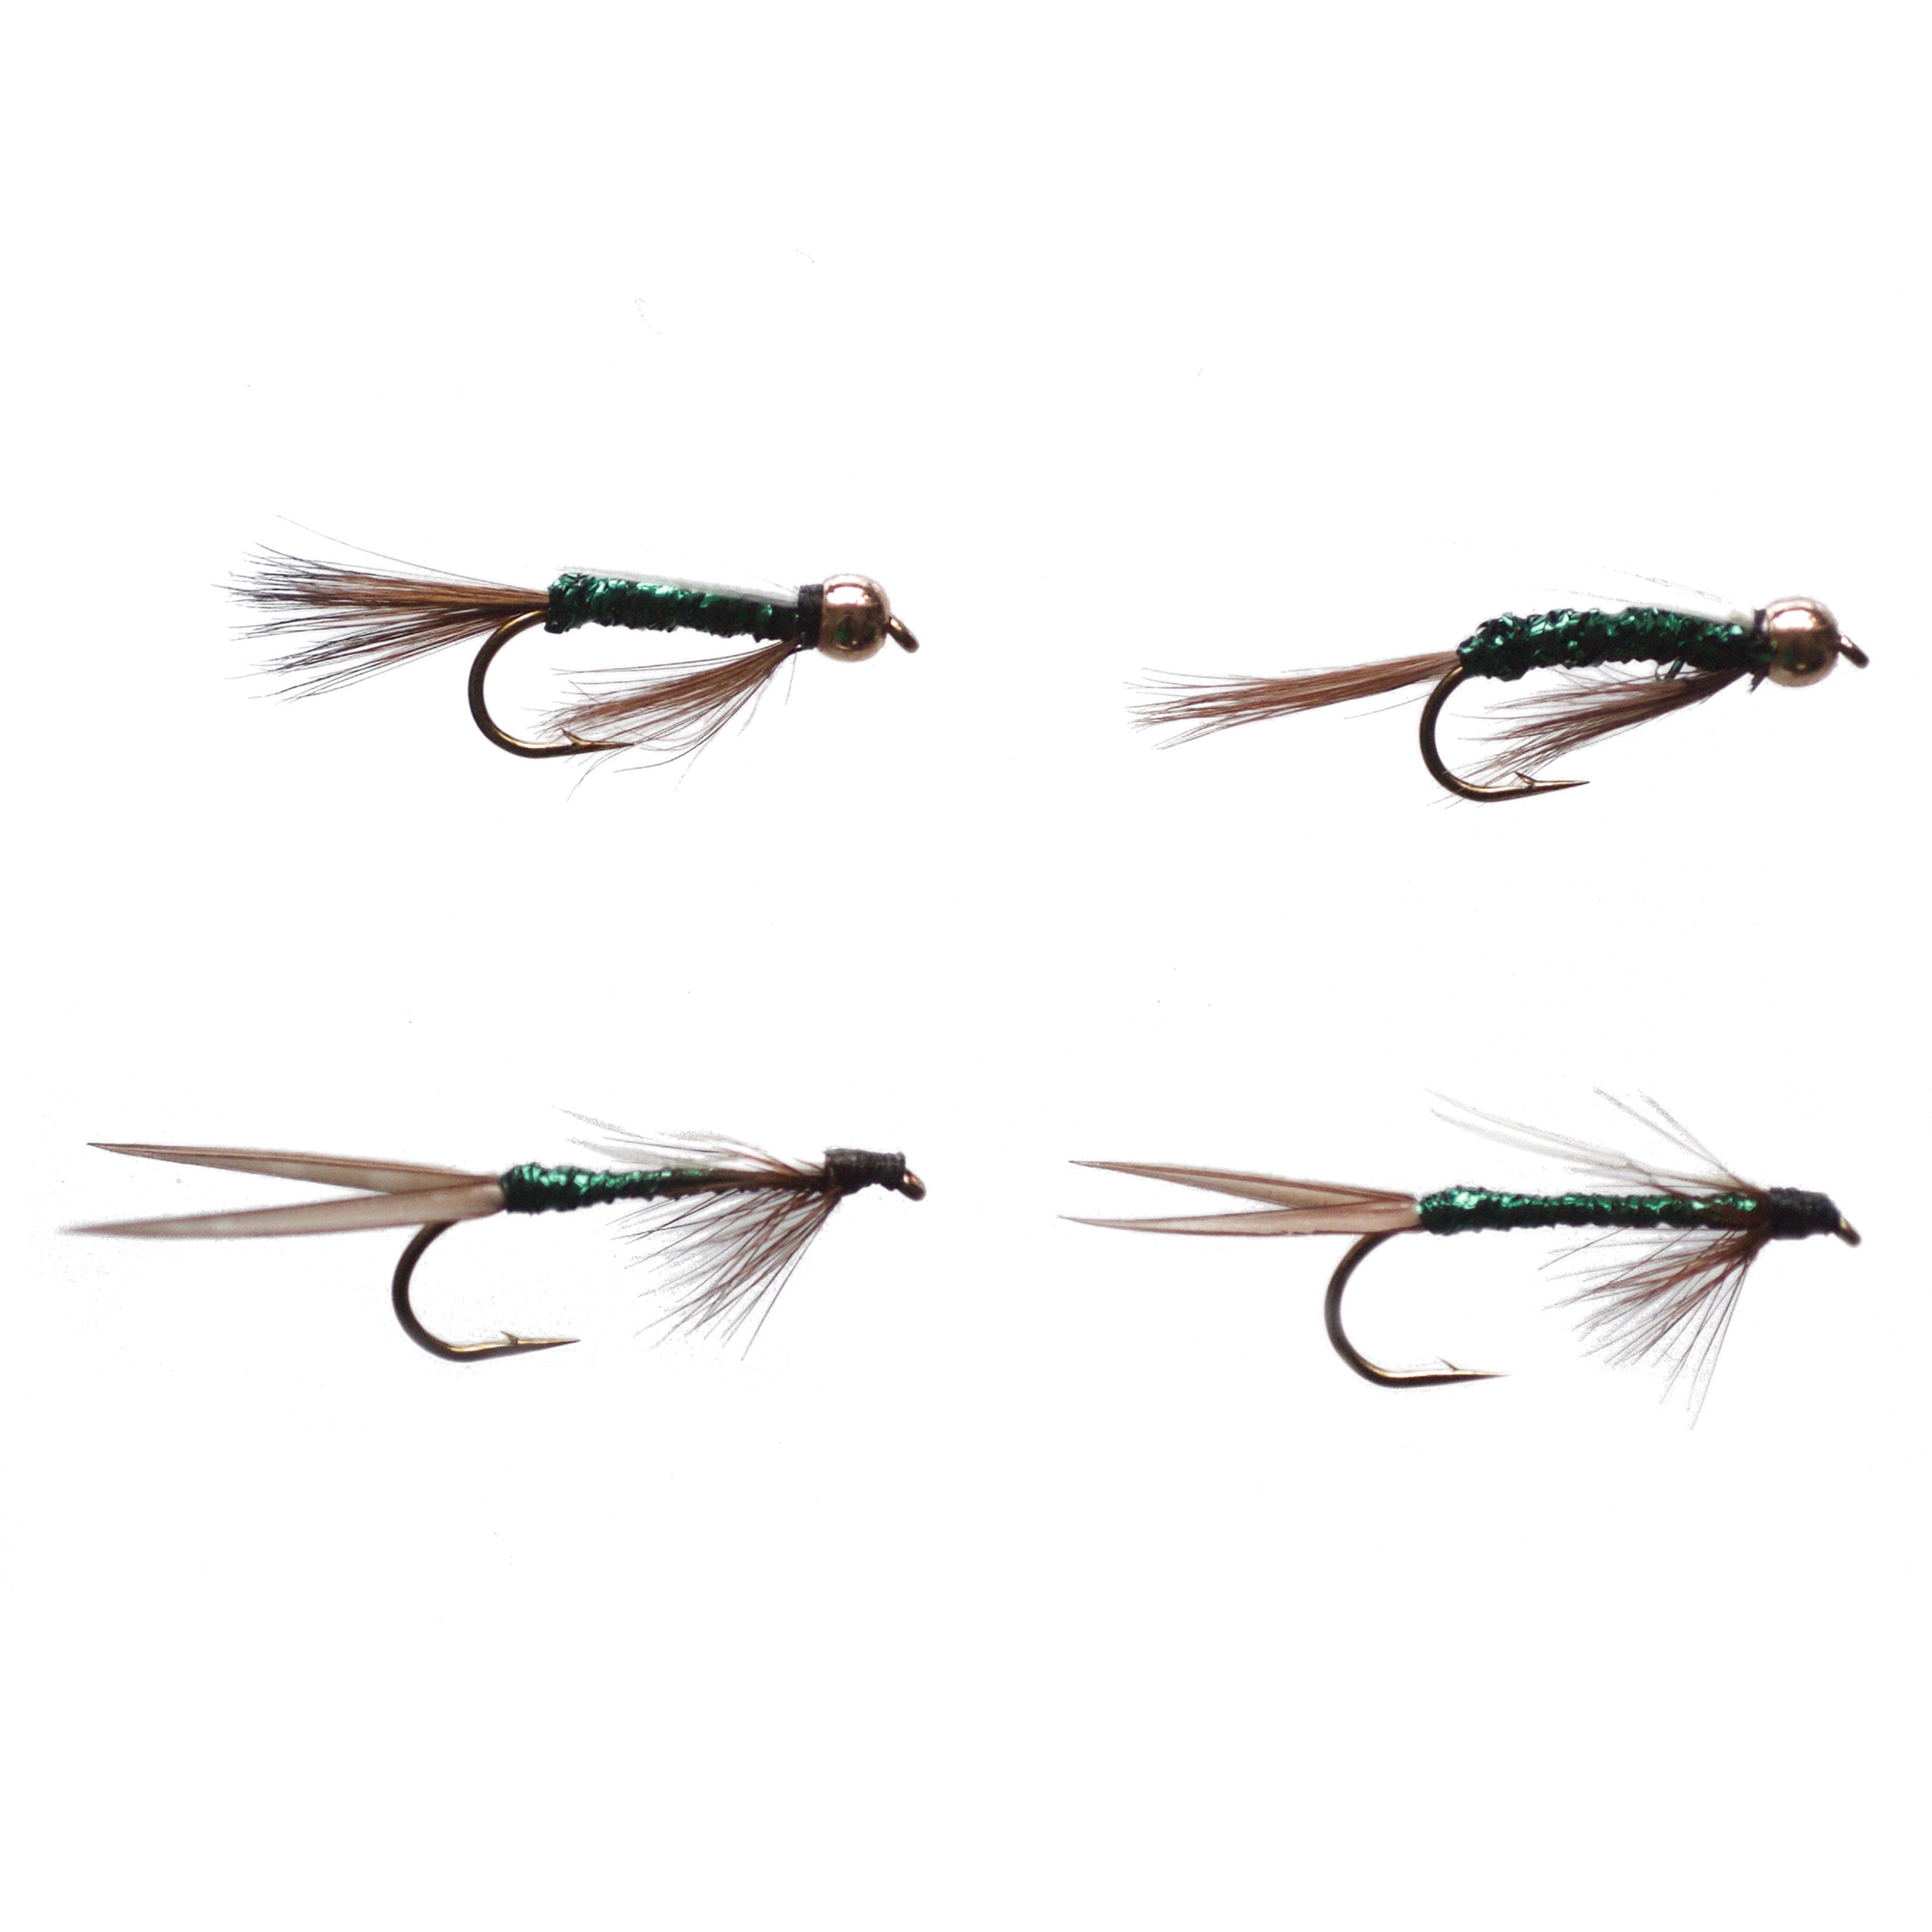 Mixed 10/12 Fly Fishing 8 Pack of Black Cruncher Trout Fly Fishing Flies 